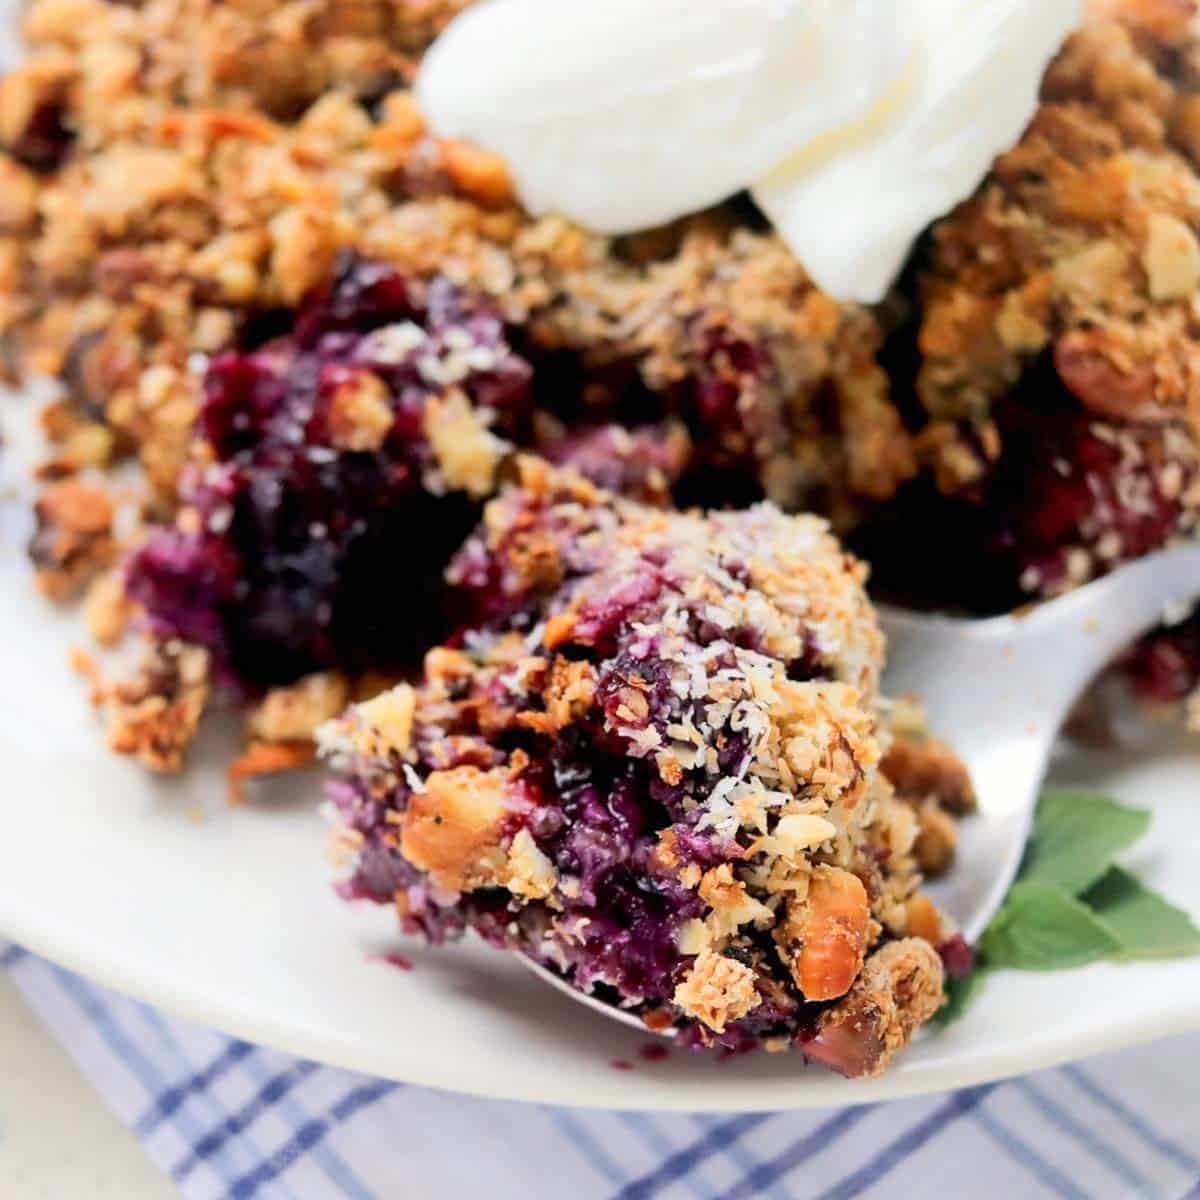 Thumbnail of low calorie berry crumble.